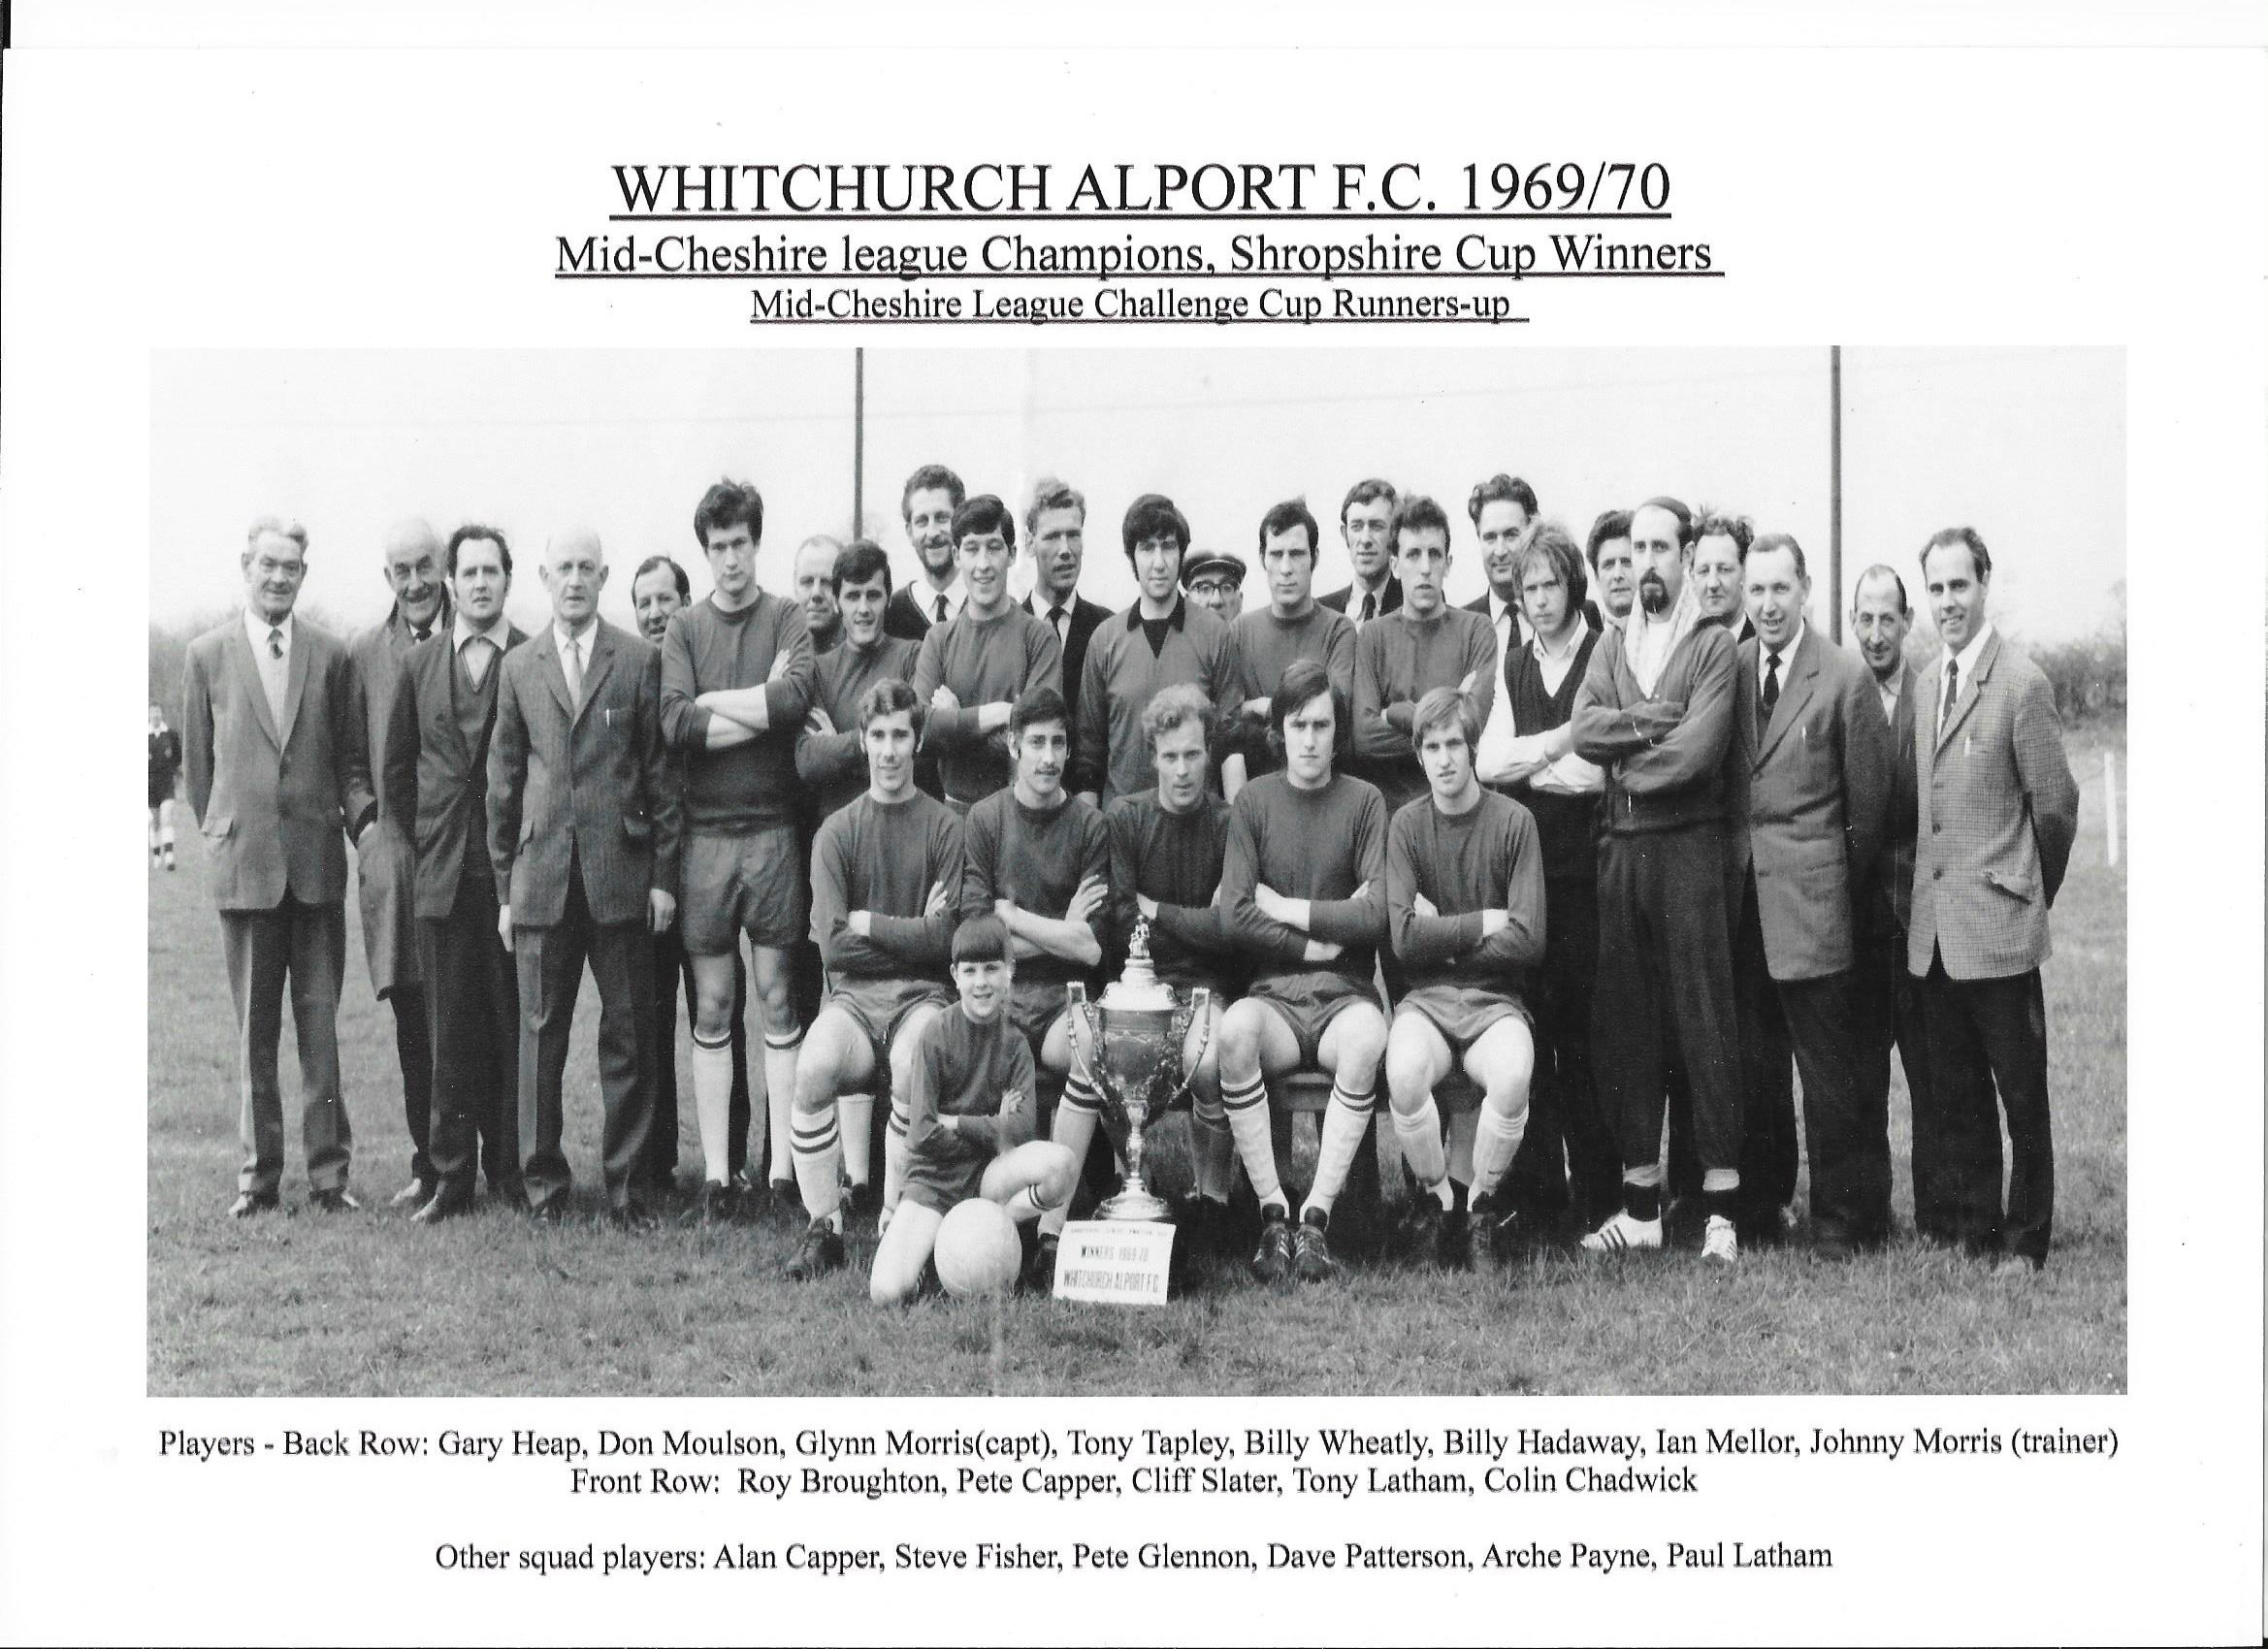 Whitchurch Alport FC in the 1970s.